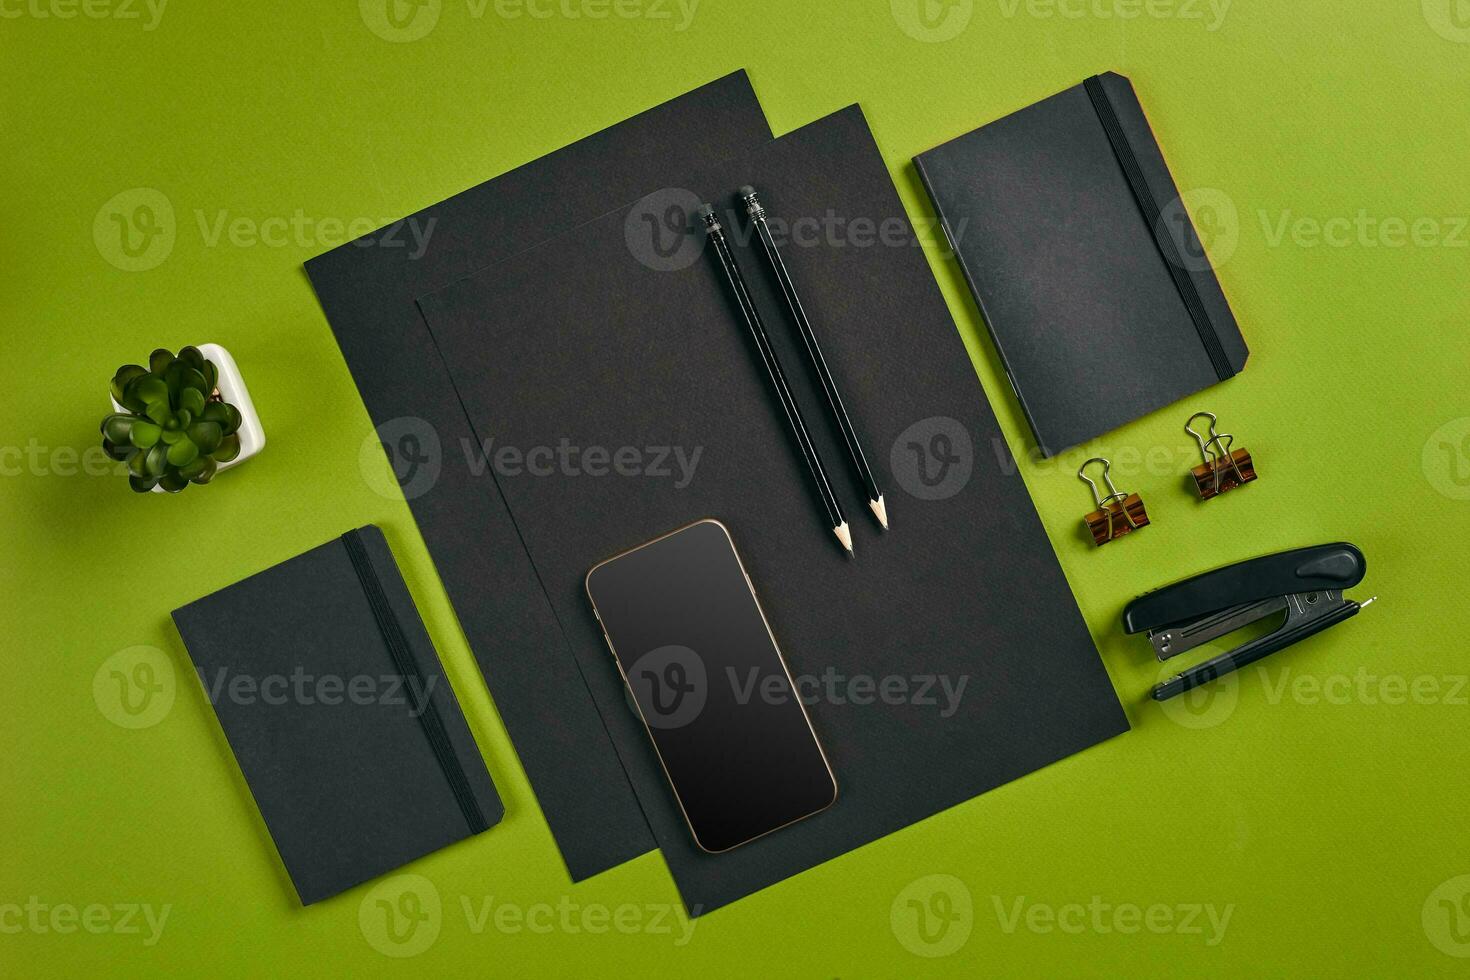 Top view in focus with different office equipment, supplies, stationery. Green background with copy space. Education, workplace concept. Close-up. photo